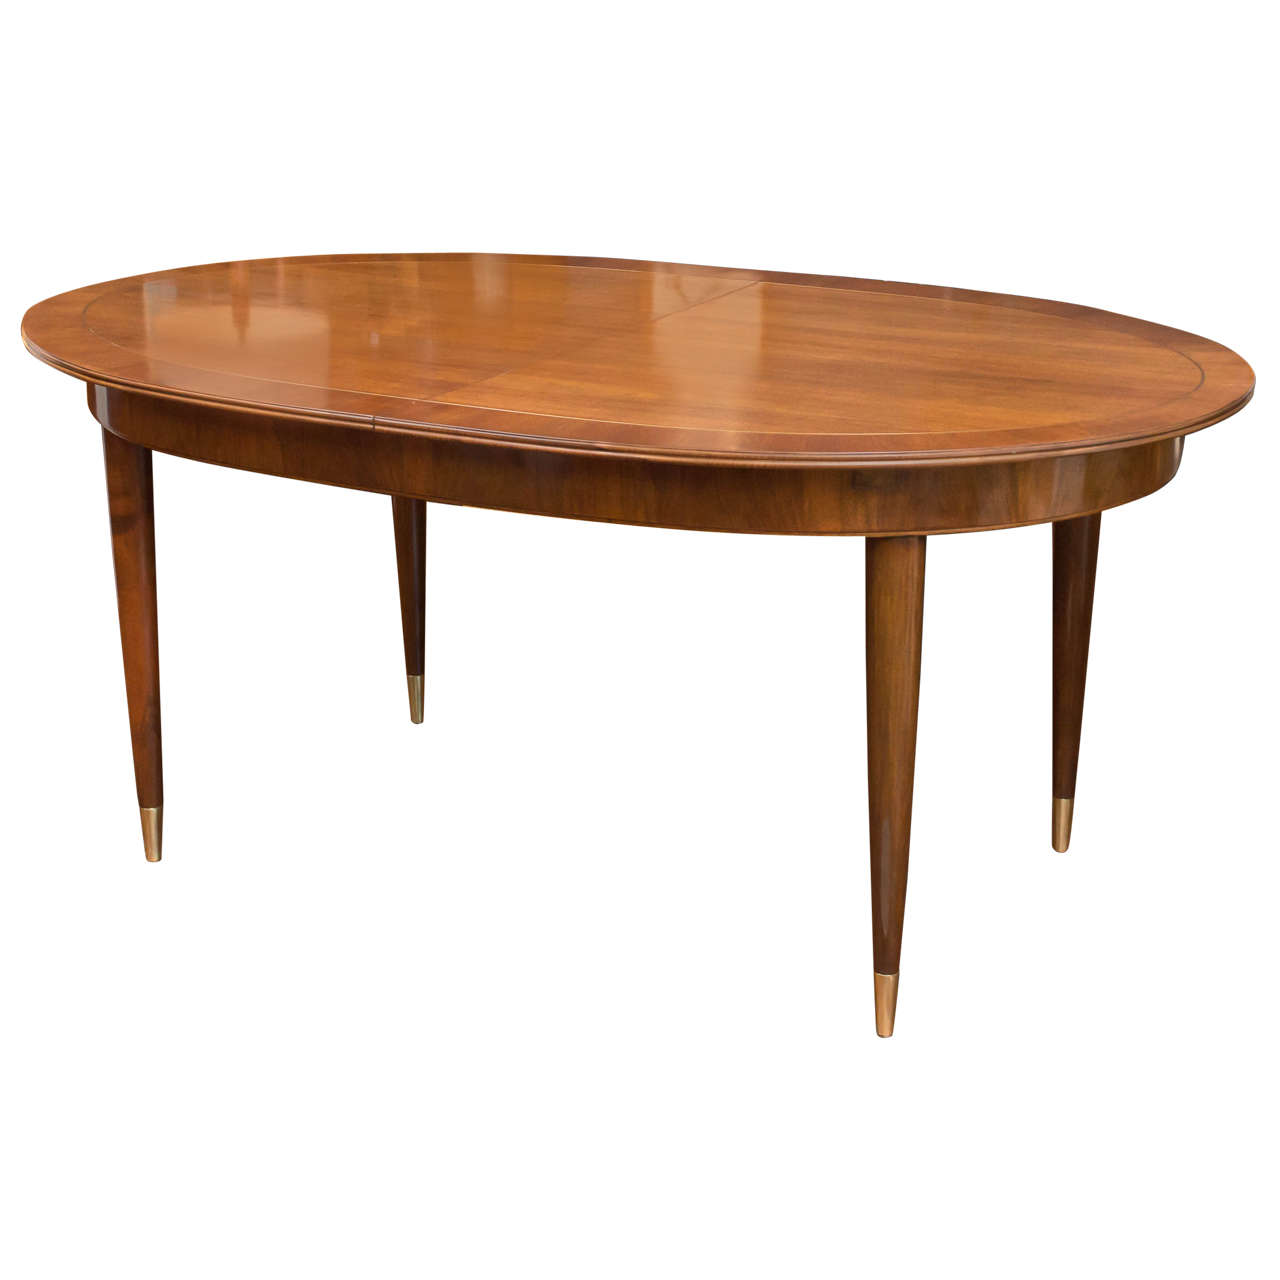 Erno Fabry Dining Table